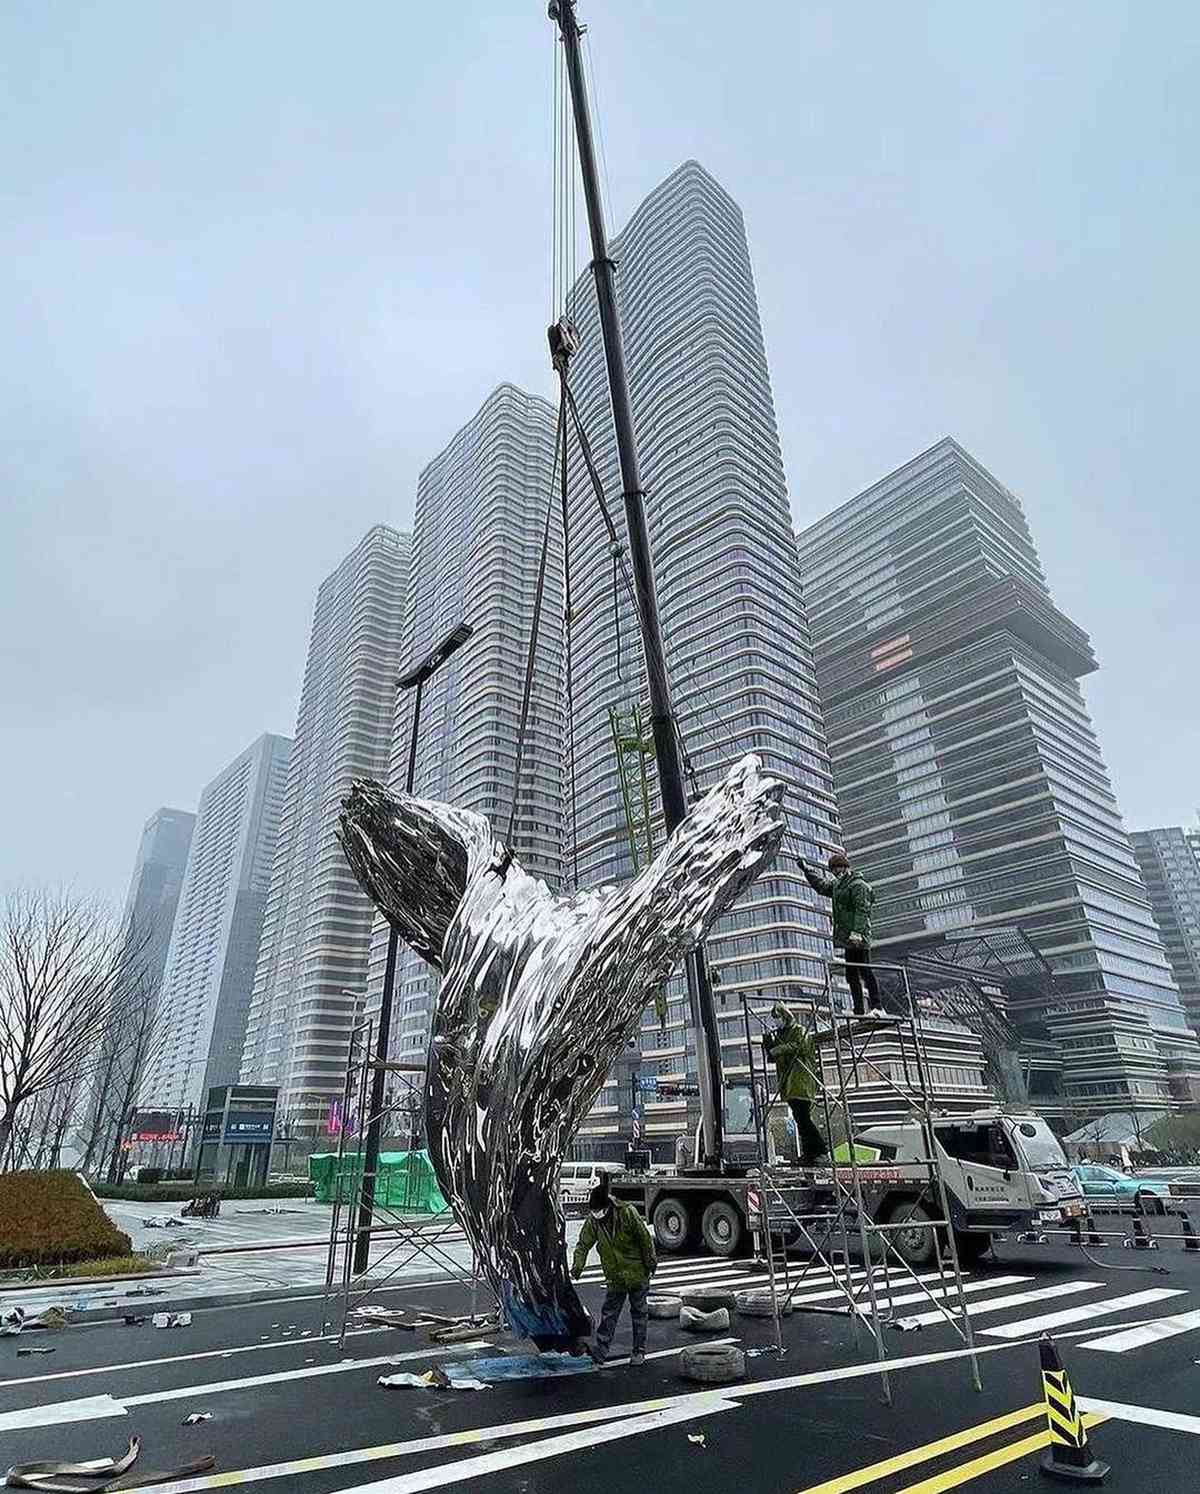 large stainless steel sculpture (1)